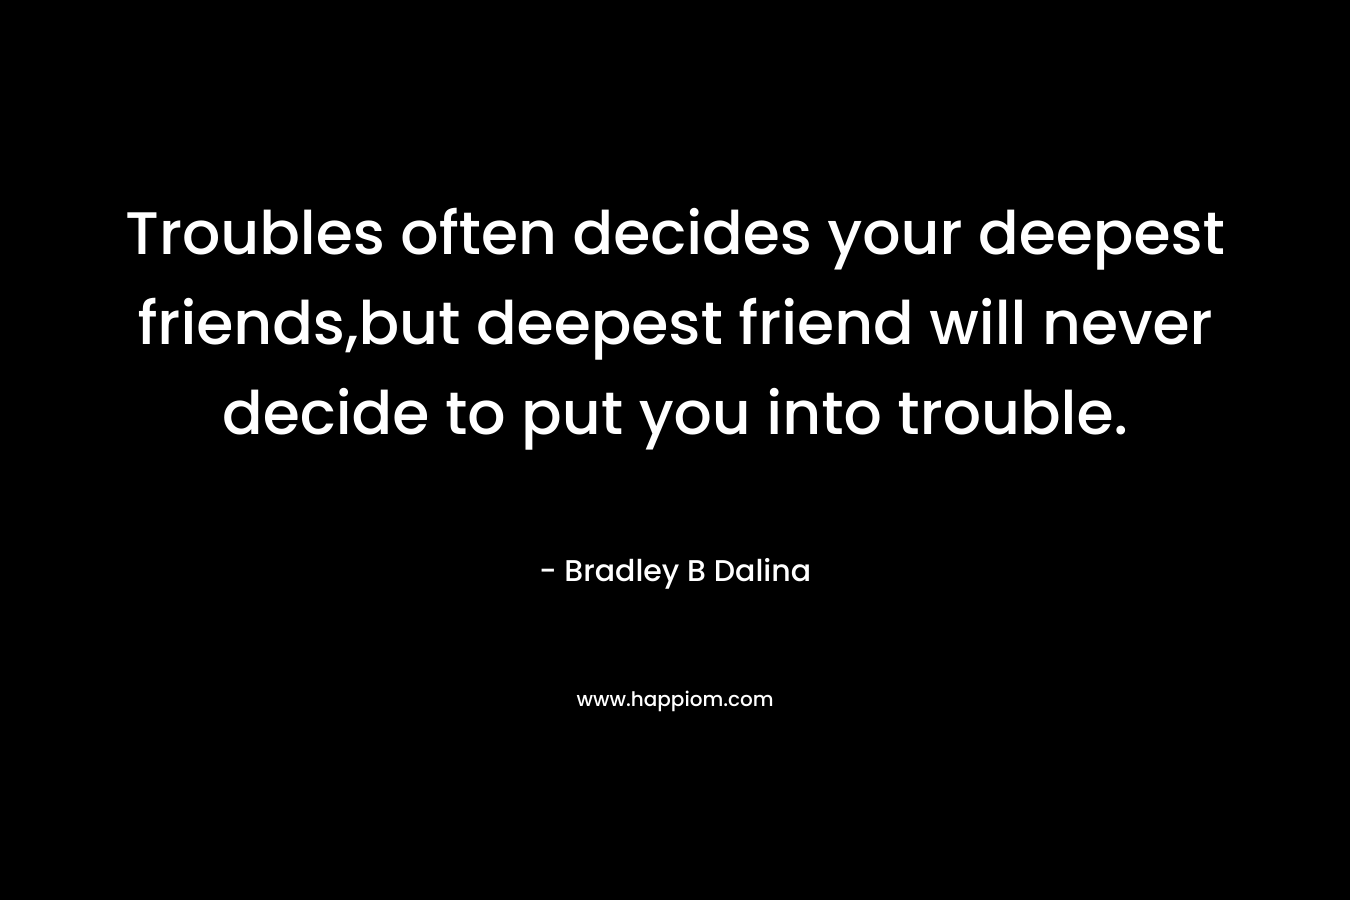 Troubles often decides your deepest friends,but deepest friend will never decide to put you into trouble.